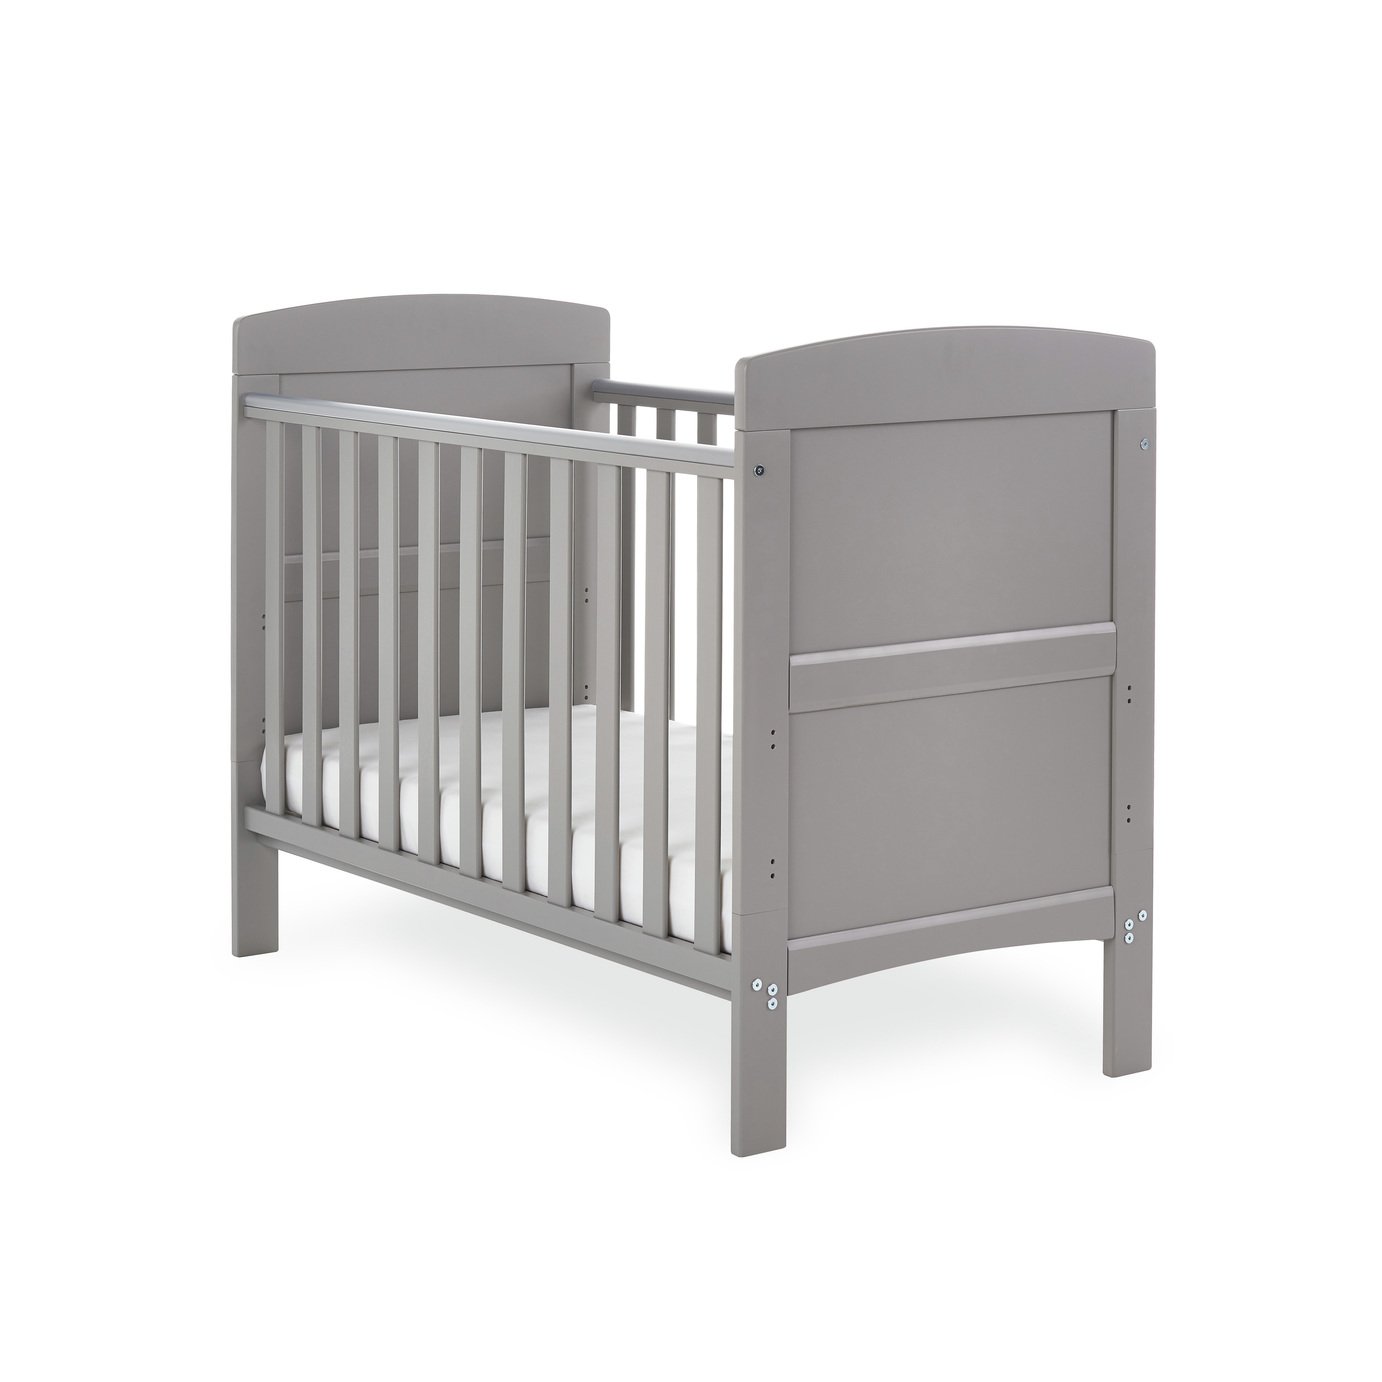 Obaby Grace Mini Baby Cot Bed Review